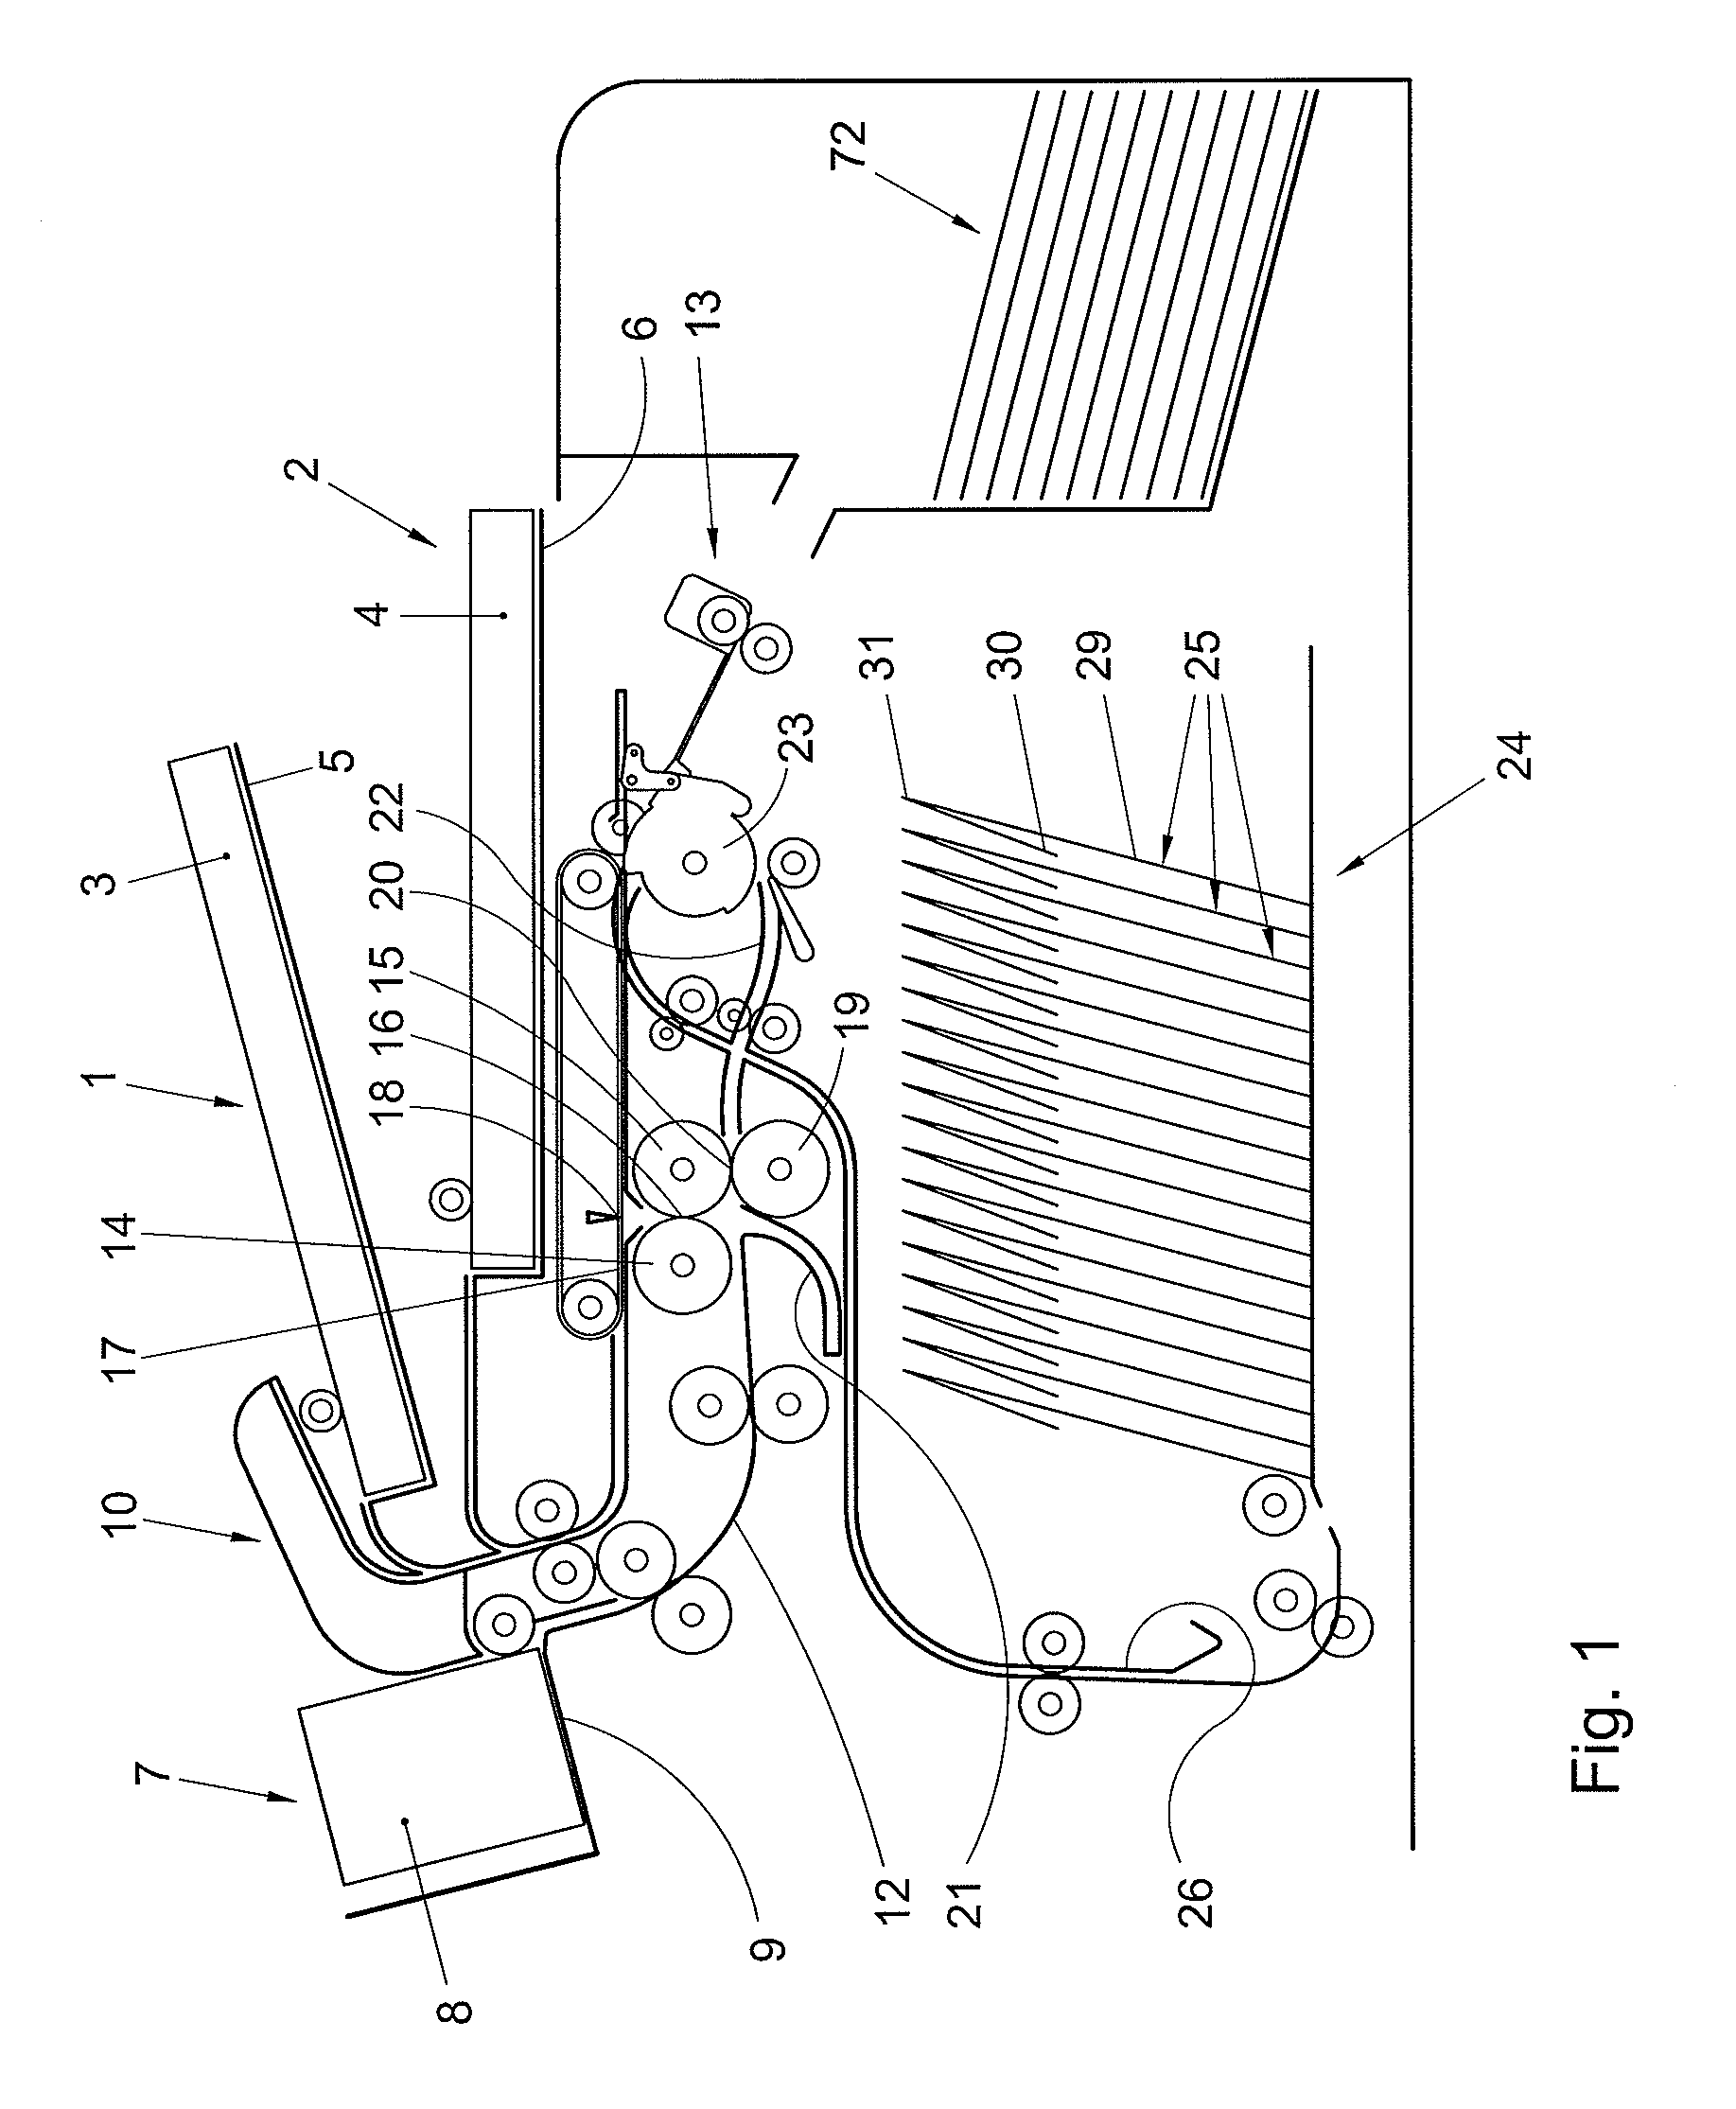 Method and an apparatus for inserting a postal item into an envelope